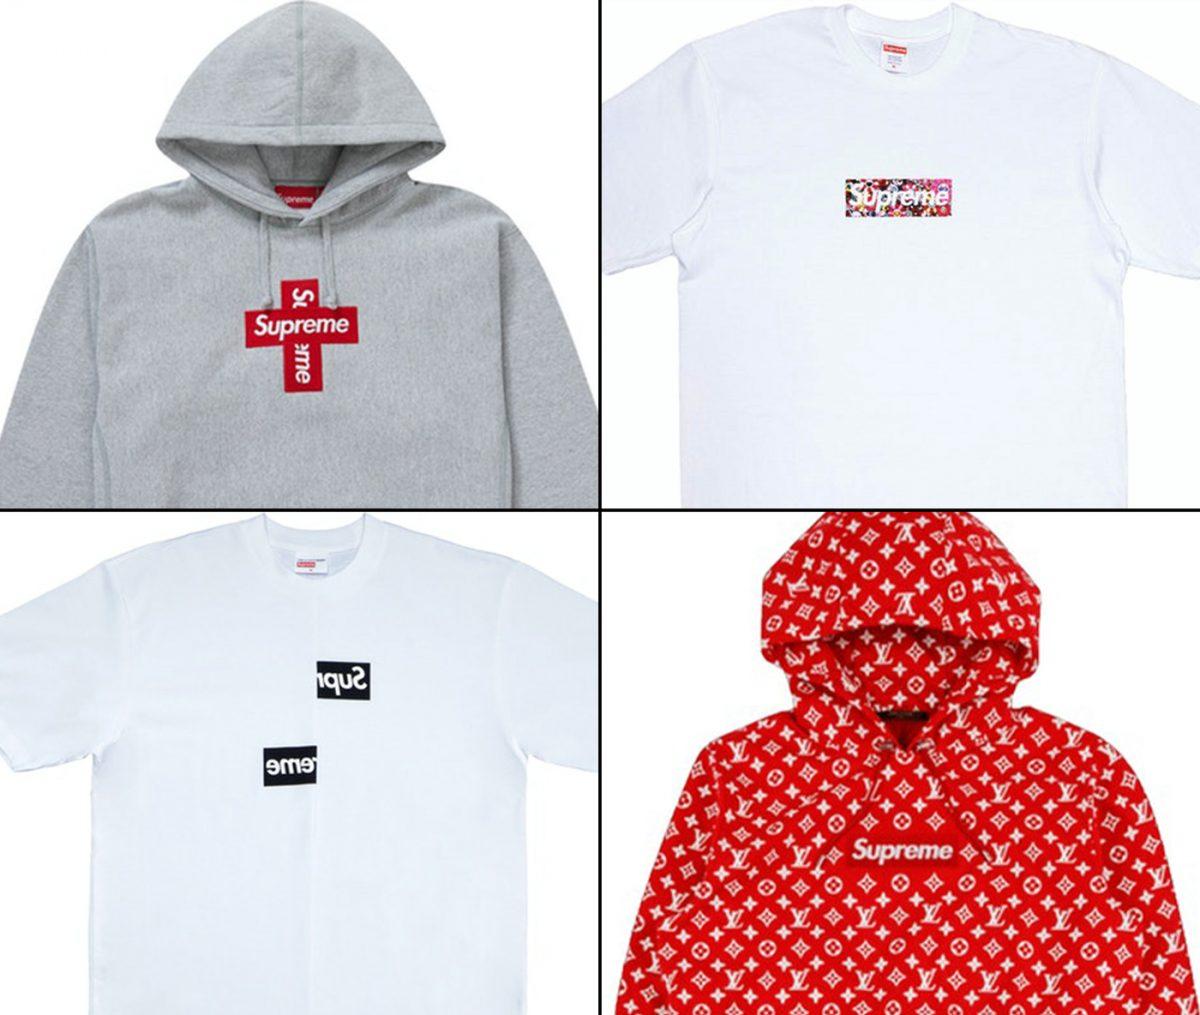 Buy the Louis Vuitton x Supreme Collaboration at StockX - StockX News